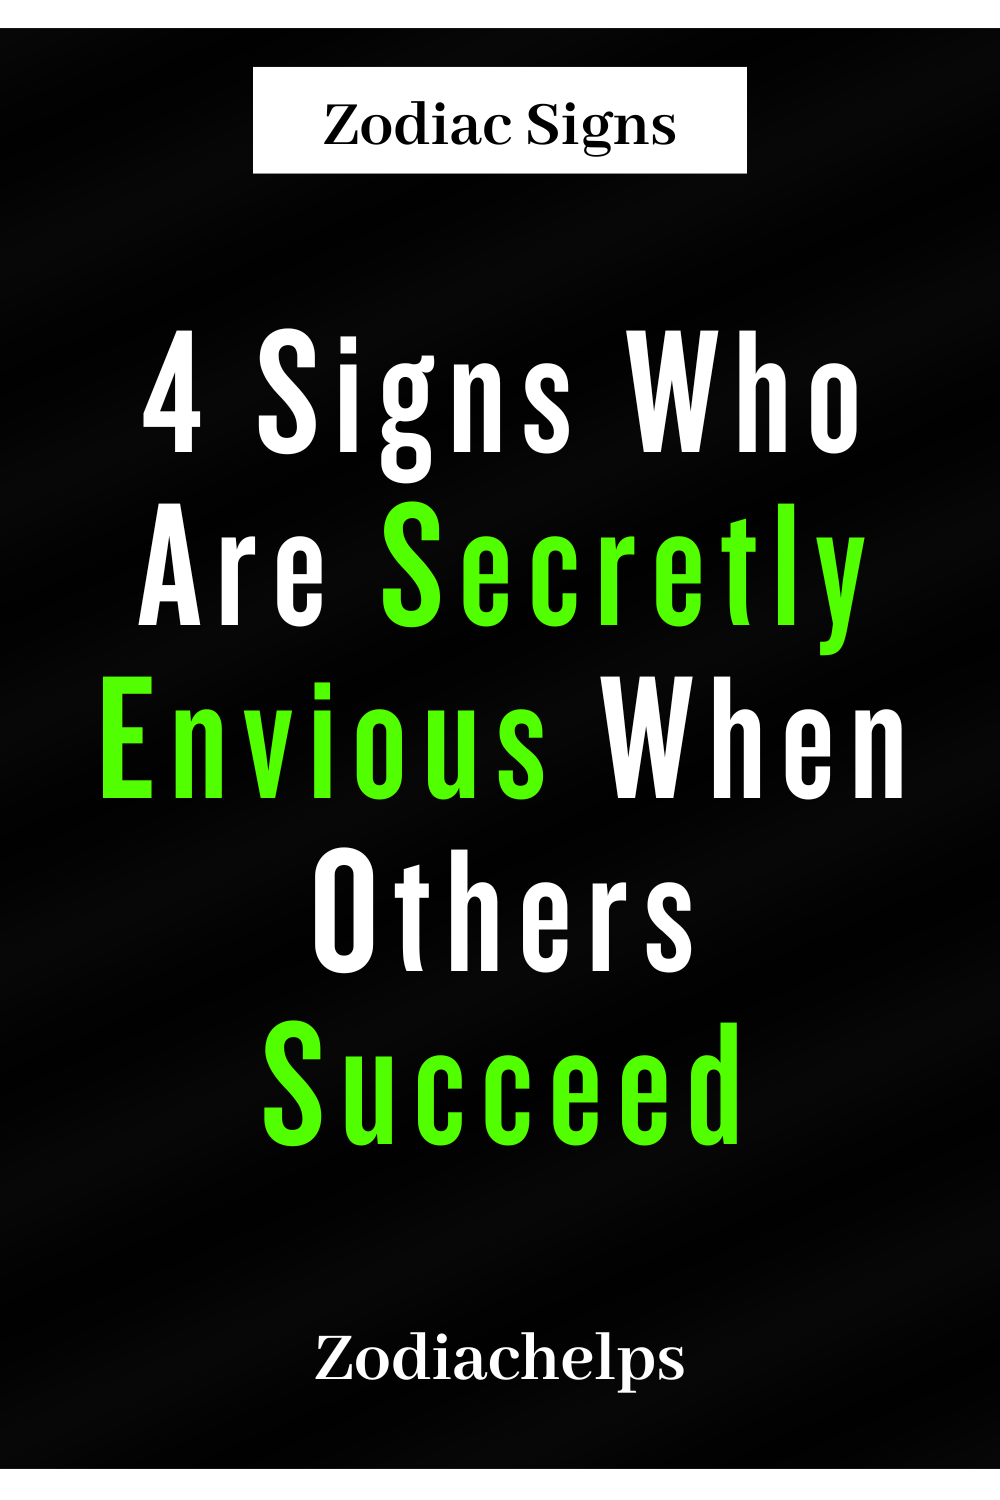 4 Signs Who Are Secretly Envious When Others Succeed